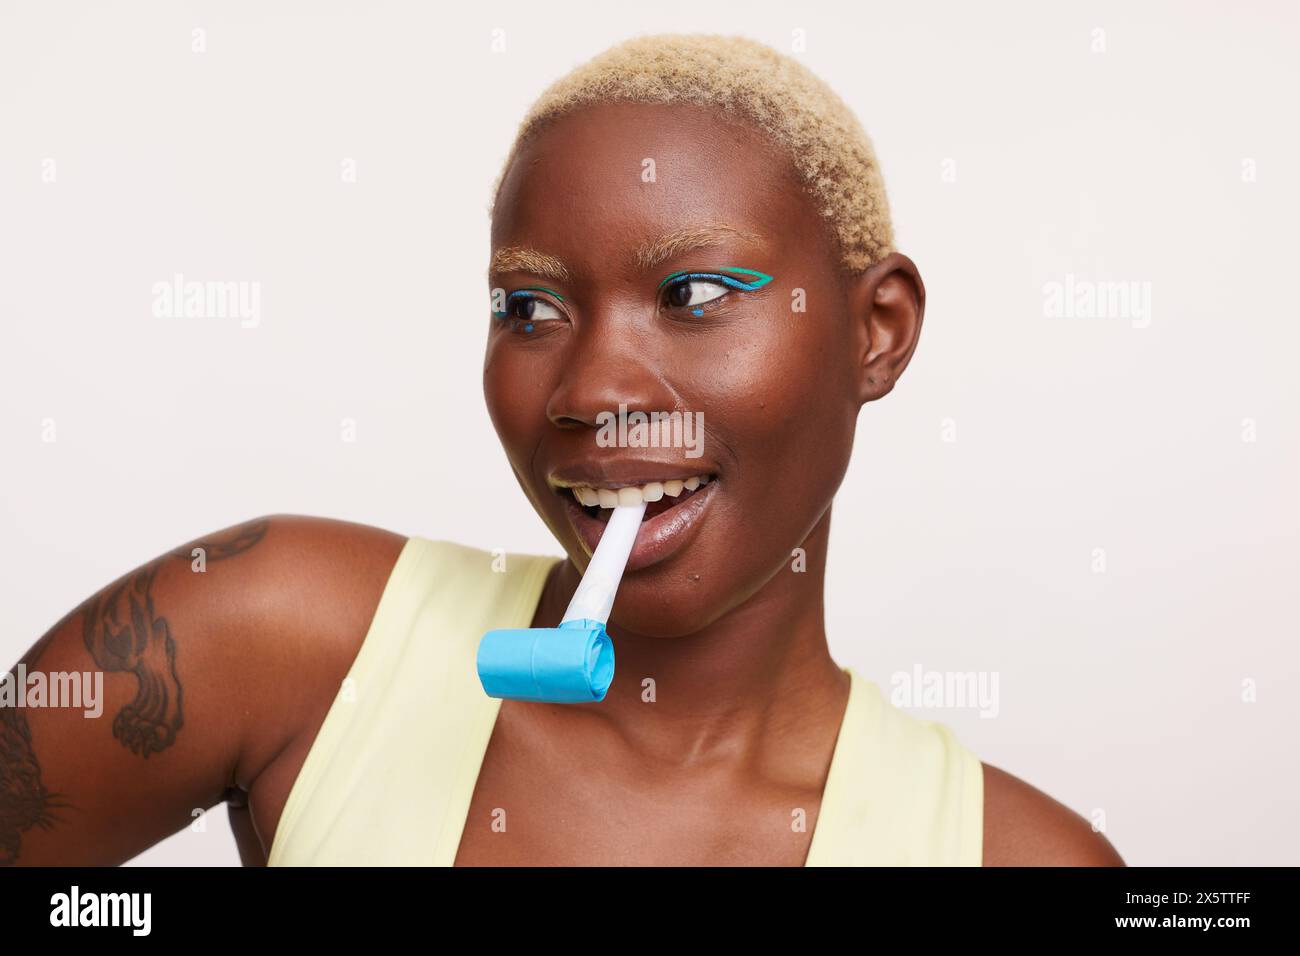 Woman with short white hair, holding party horn blower in mouth Stock Photo